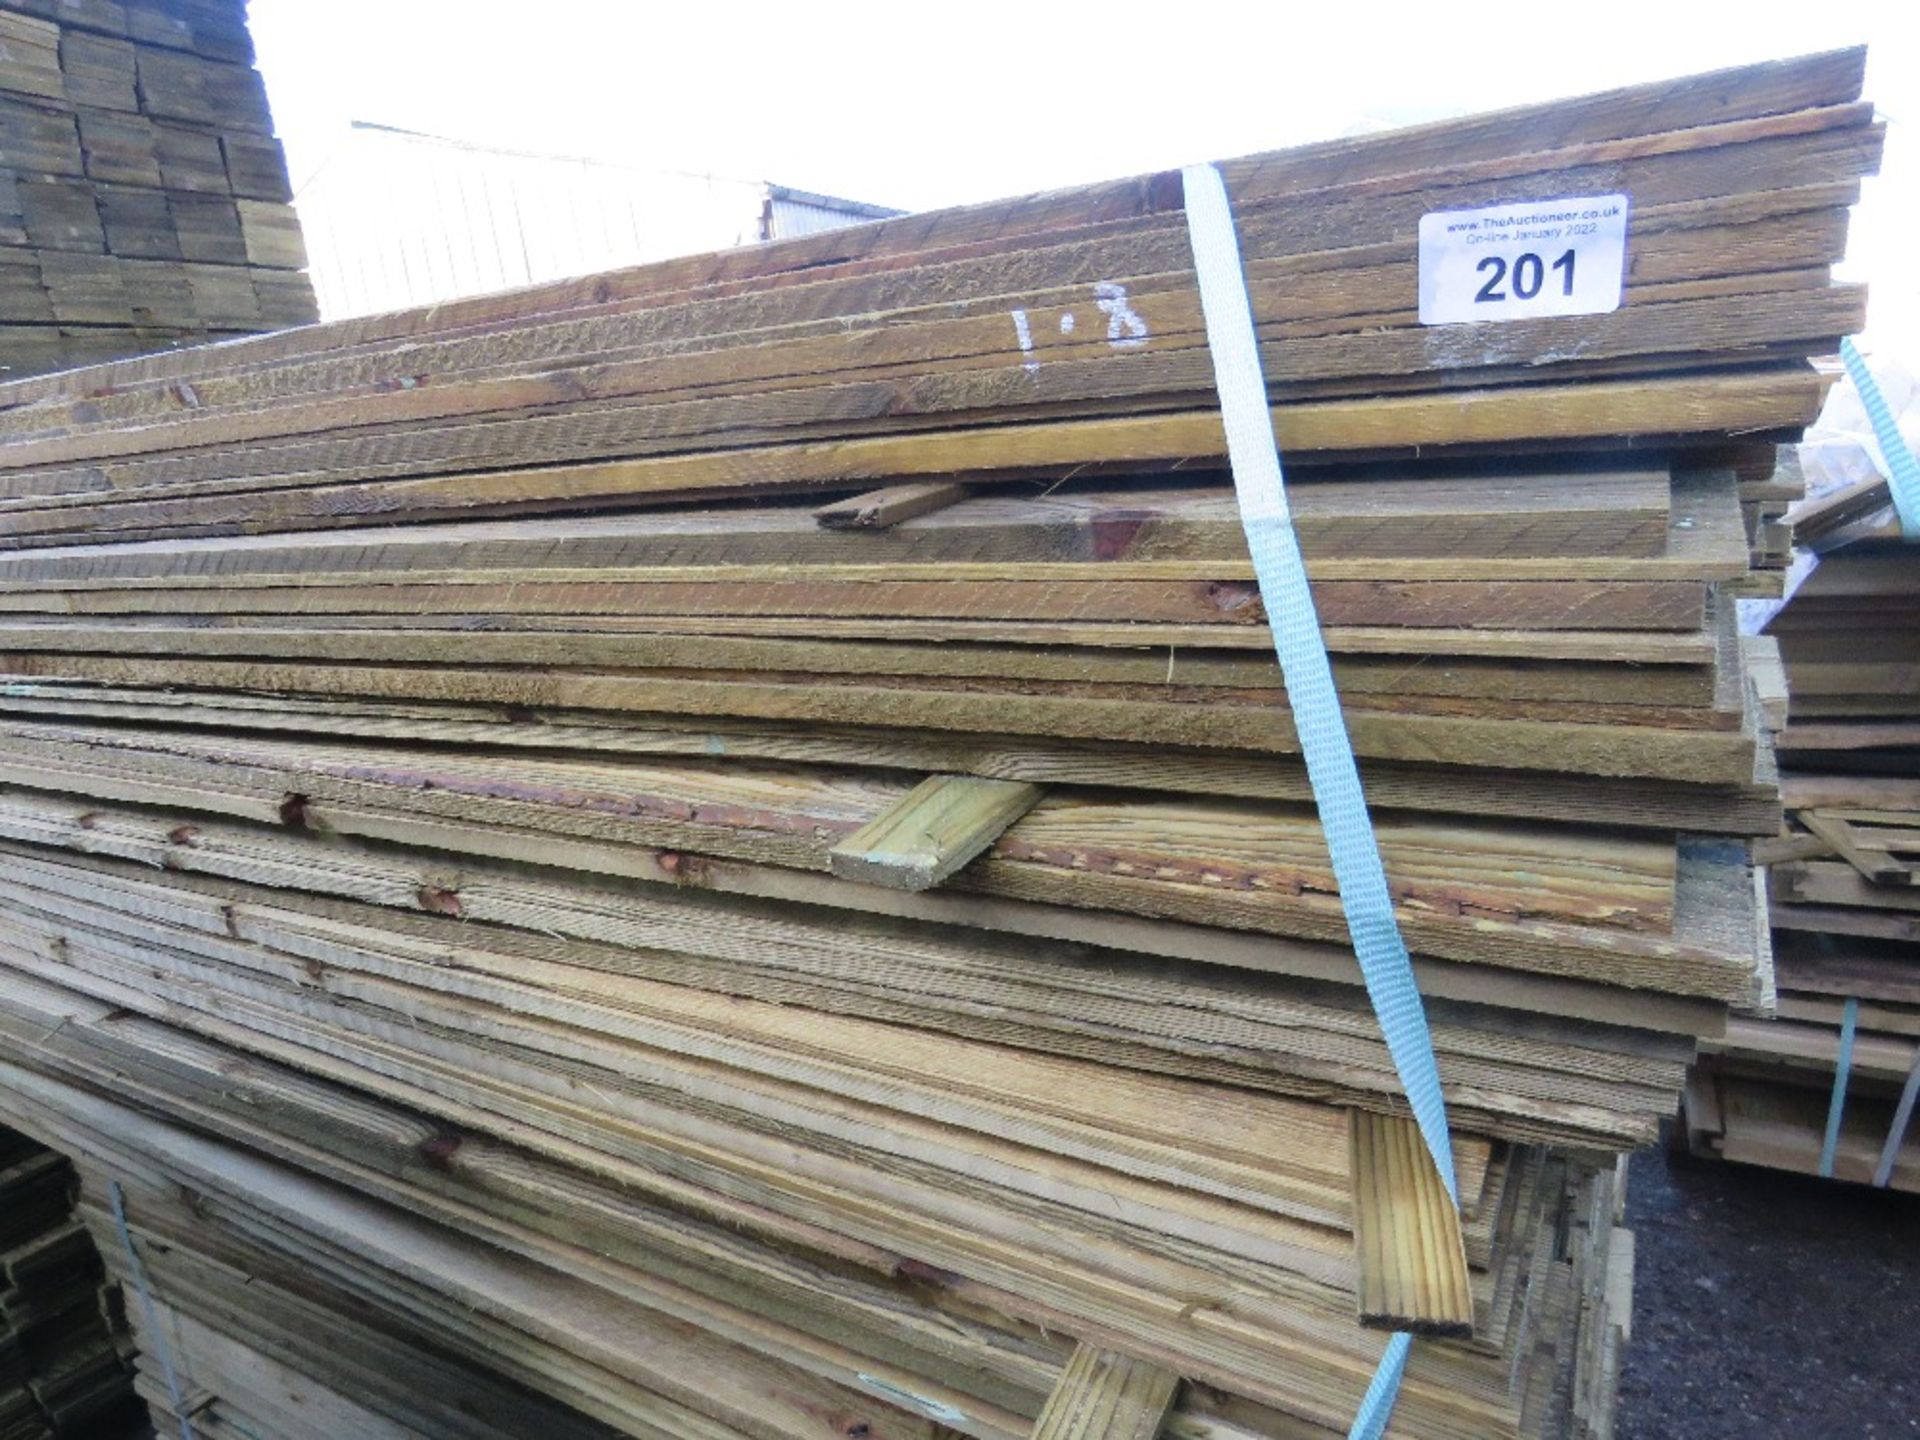 LARGE BUNDLE OF PRESSURE TREATED FEATHER EDGE TIMBER CLADDING: 1.8M LENGTH X 10CM WIDTH APPROX.